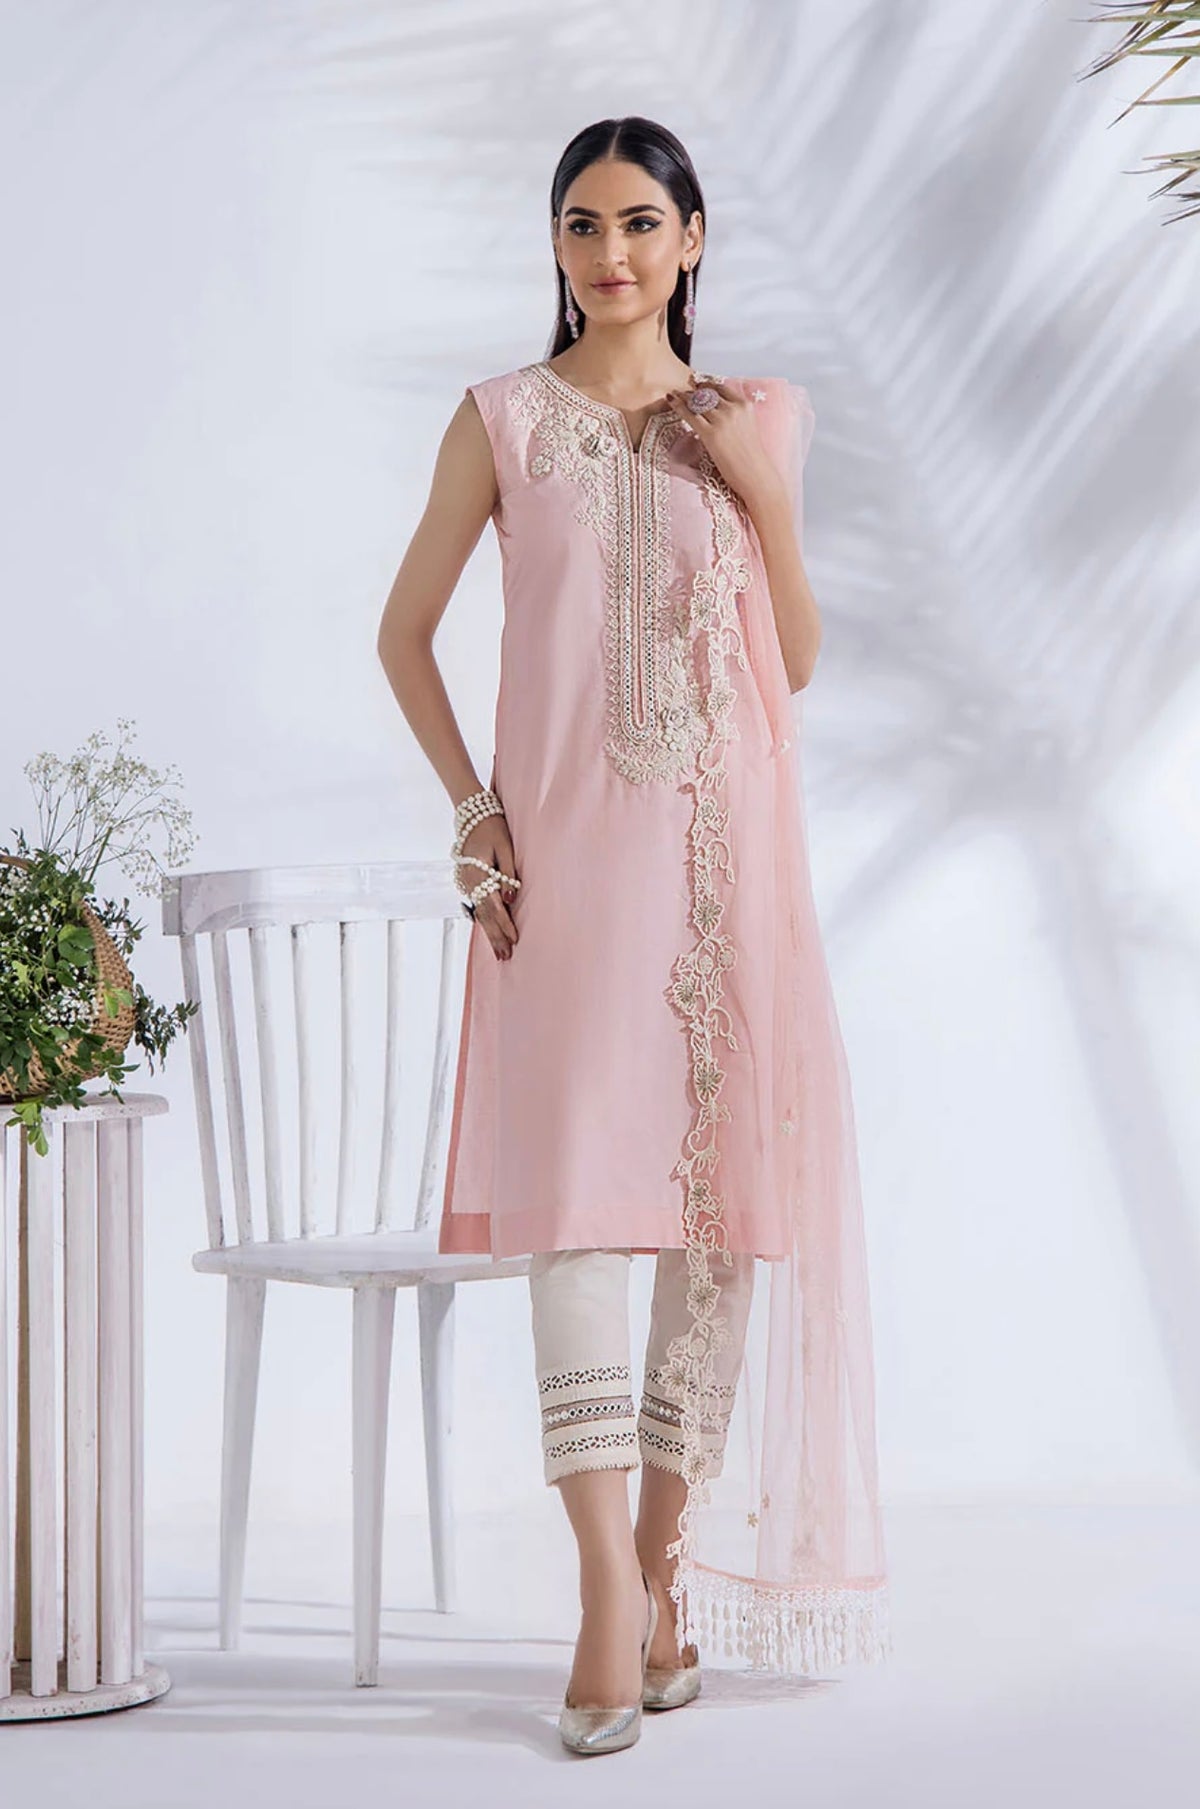 KHUDA BAKSH CREATIONS | EMBROIDERED 3PC READY TO WEAR | M-106